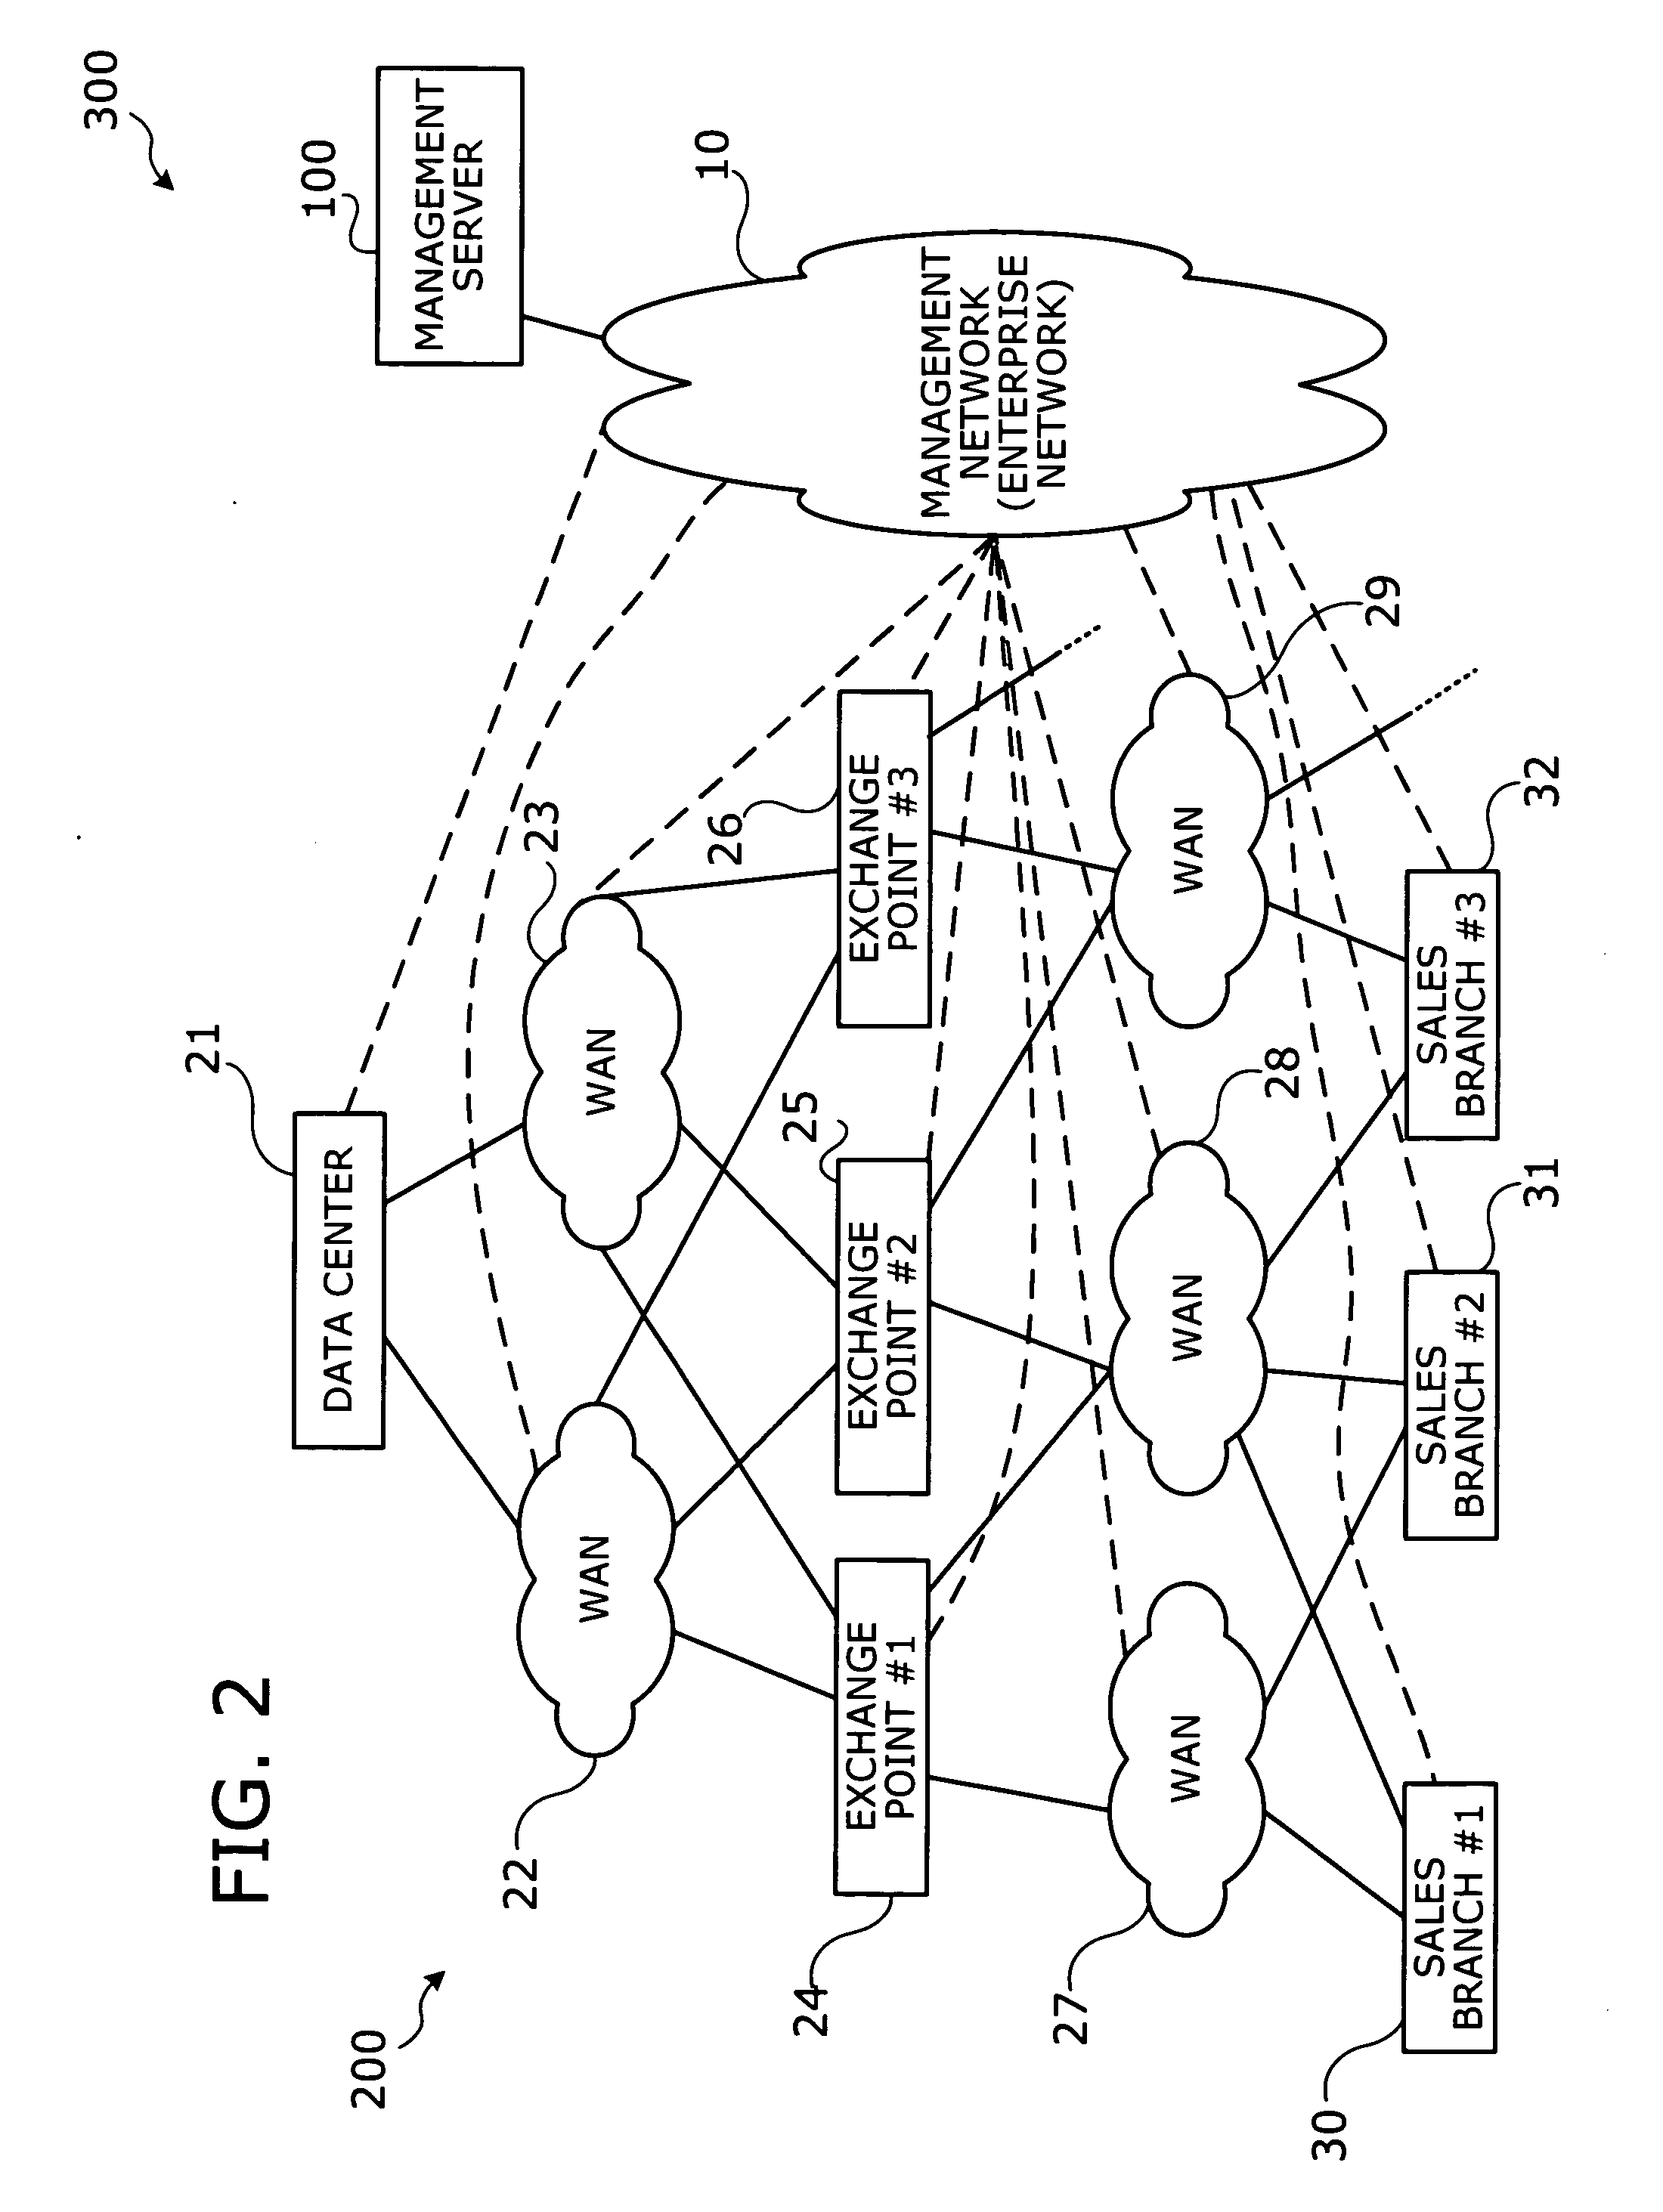 Method, apparatus, and program for configuring networks with consistent route and bandwidth settings